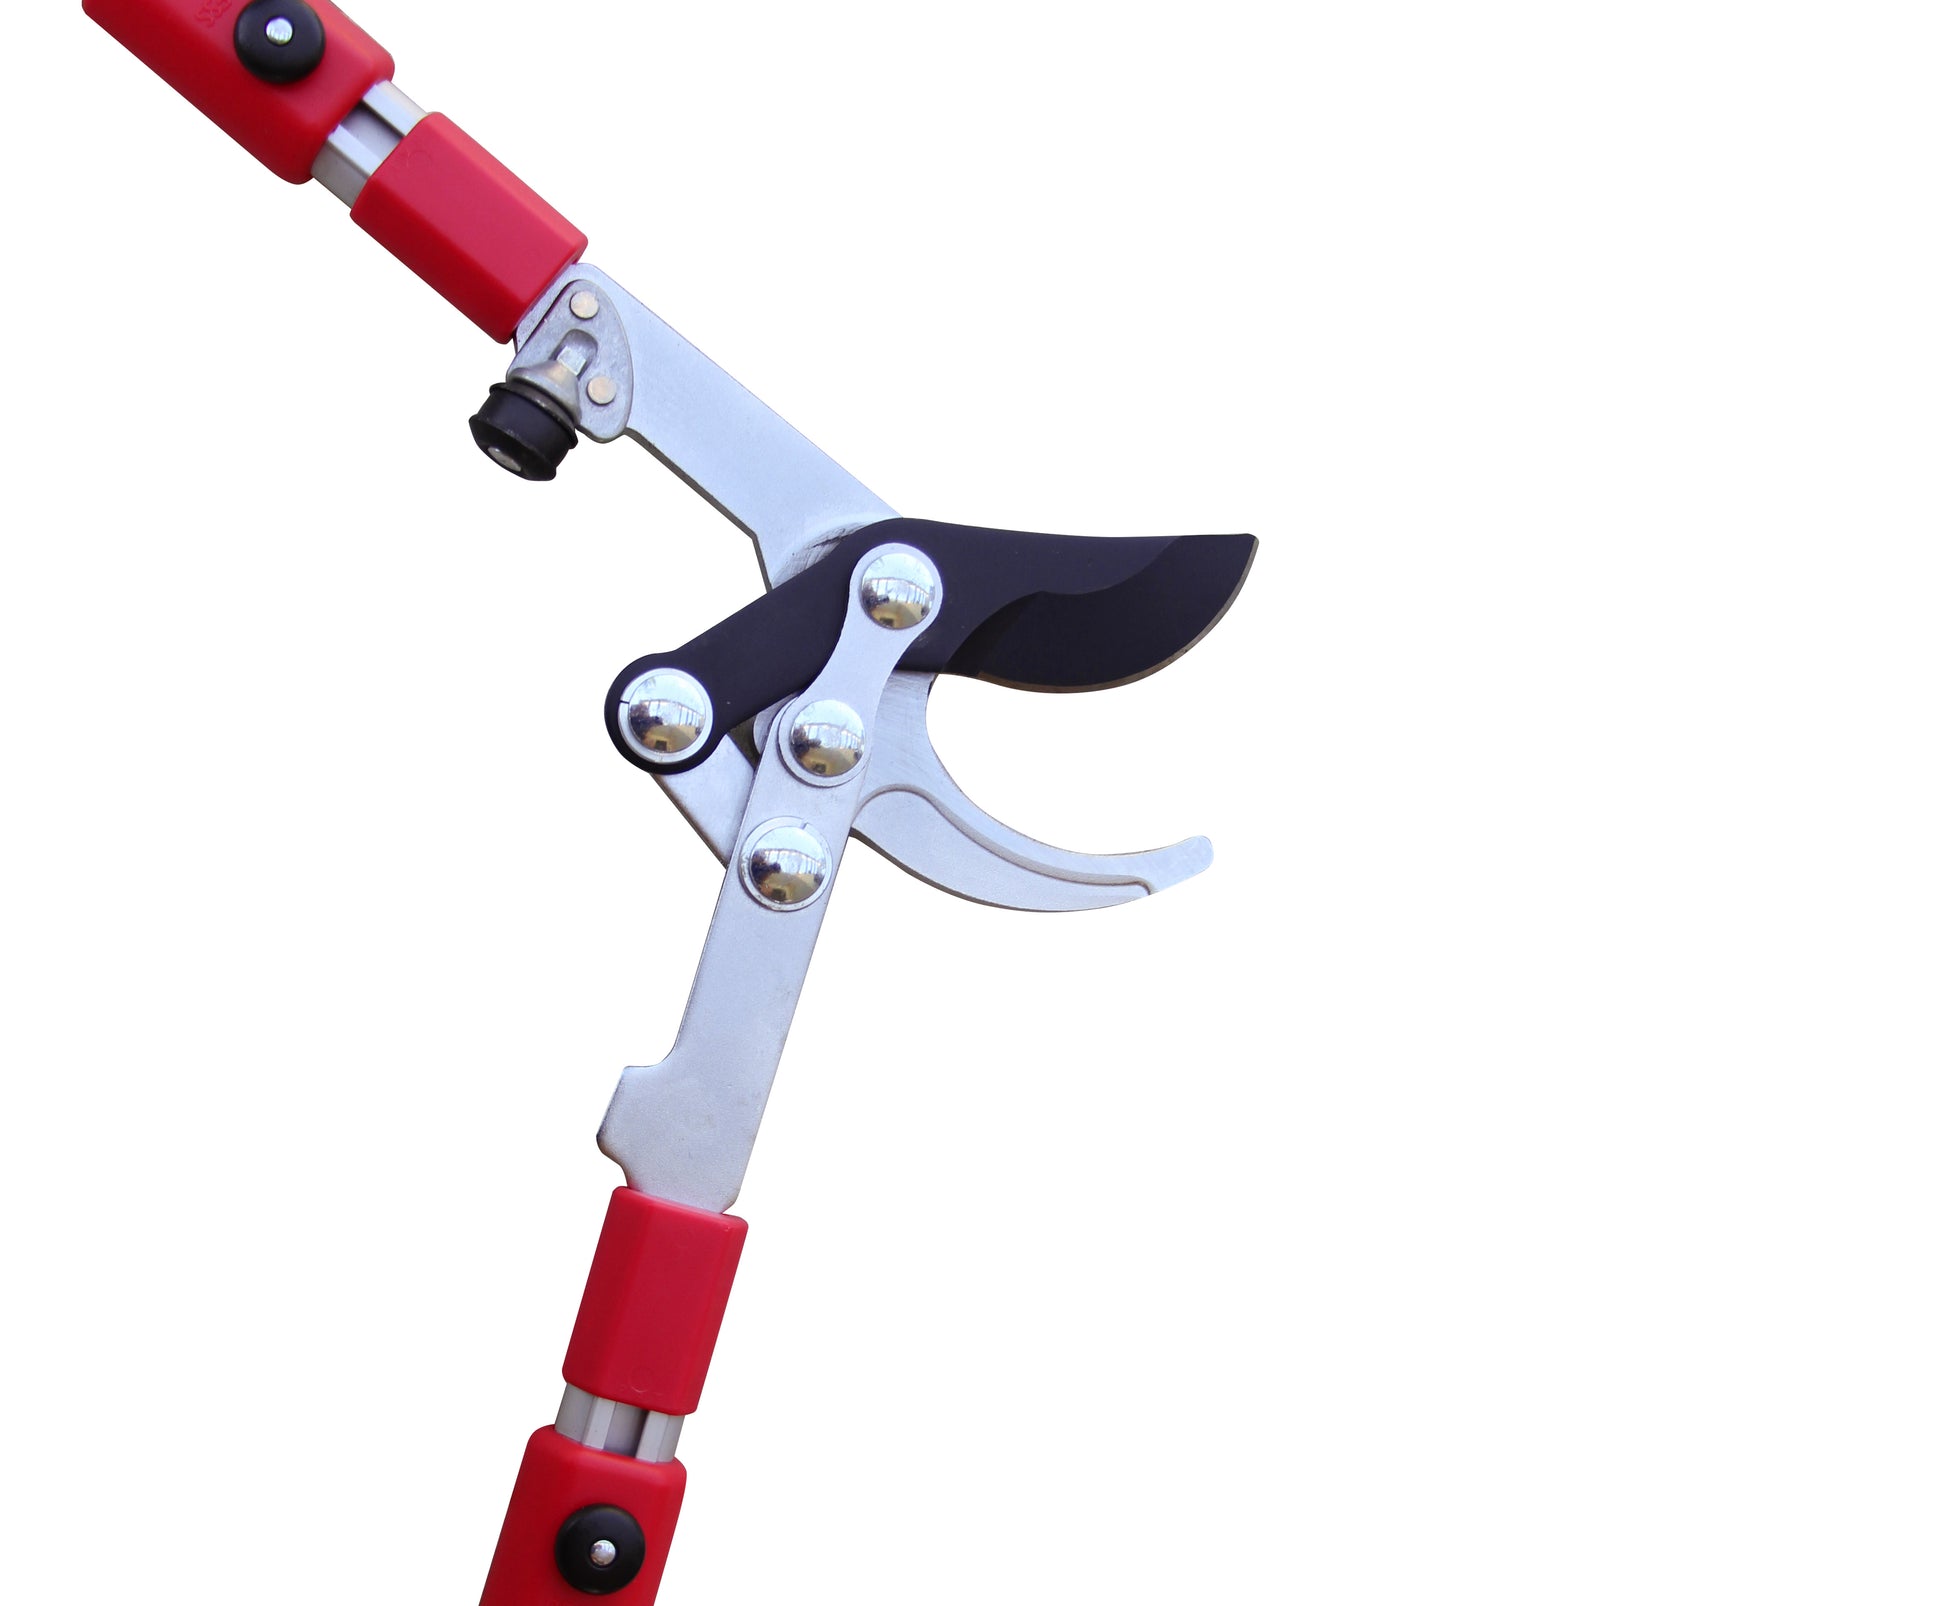 Wolf Garten Telescopic Anvil loppers review - Pruning - Tools